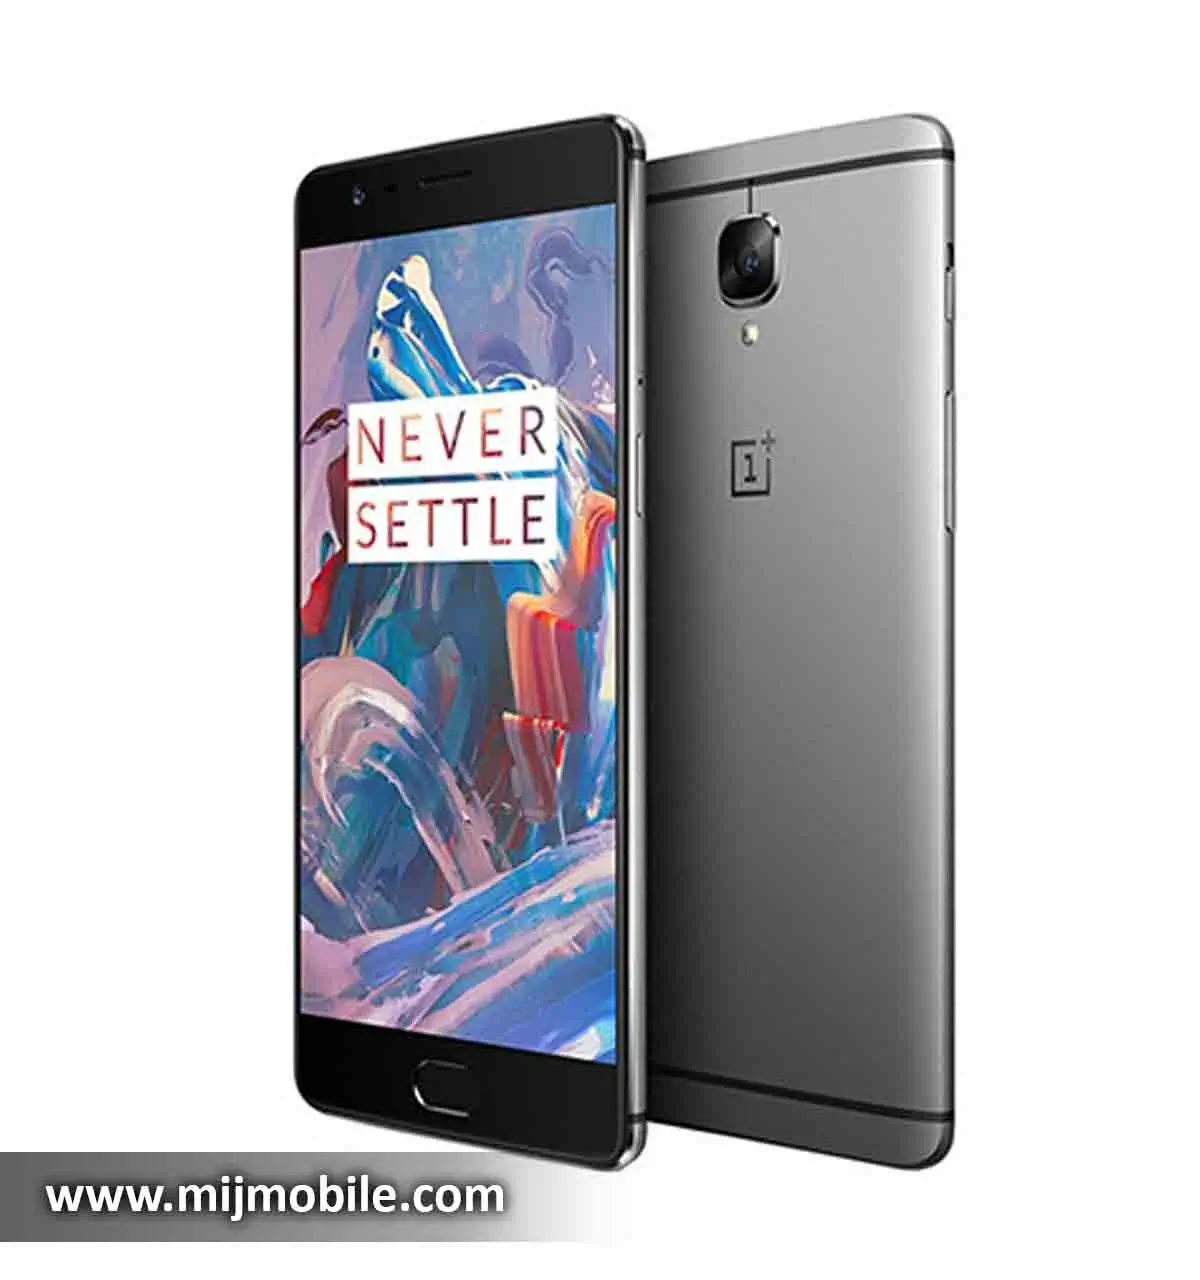 OnePlus 3 Price in Pakistan & Specifications OnePlus 3 Price in Pakistan is only 39,999.